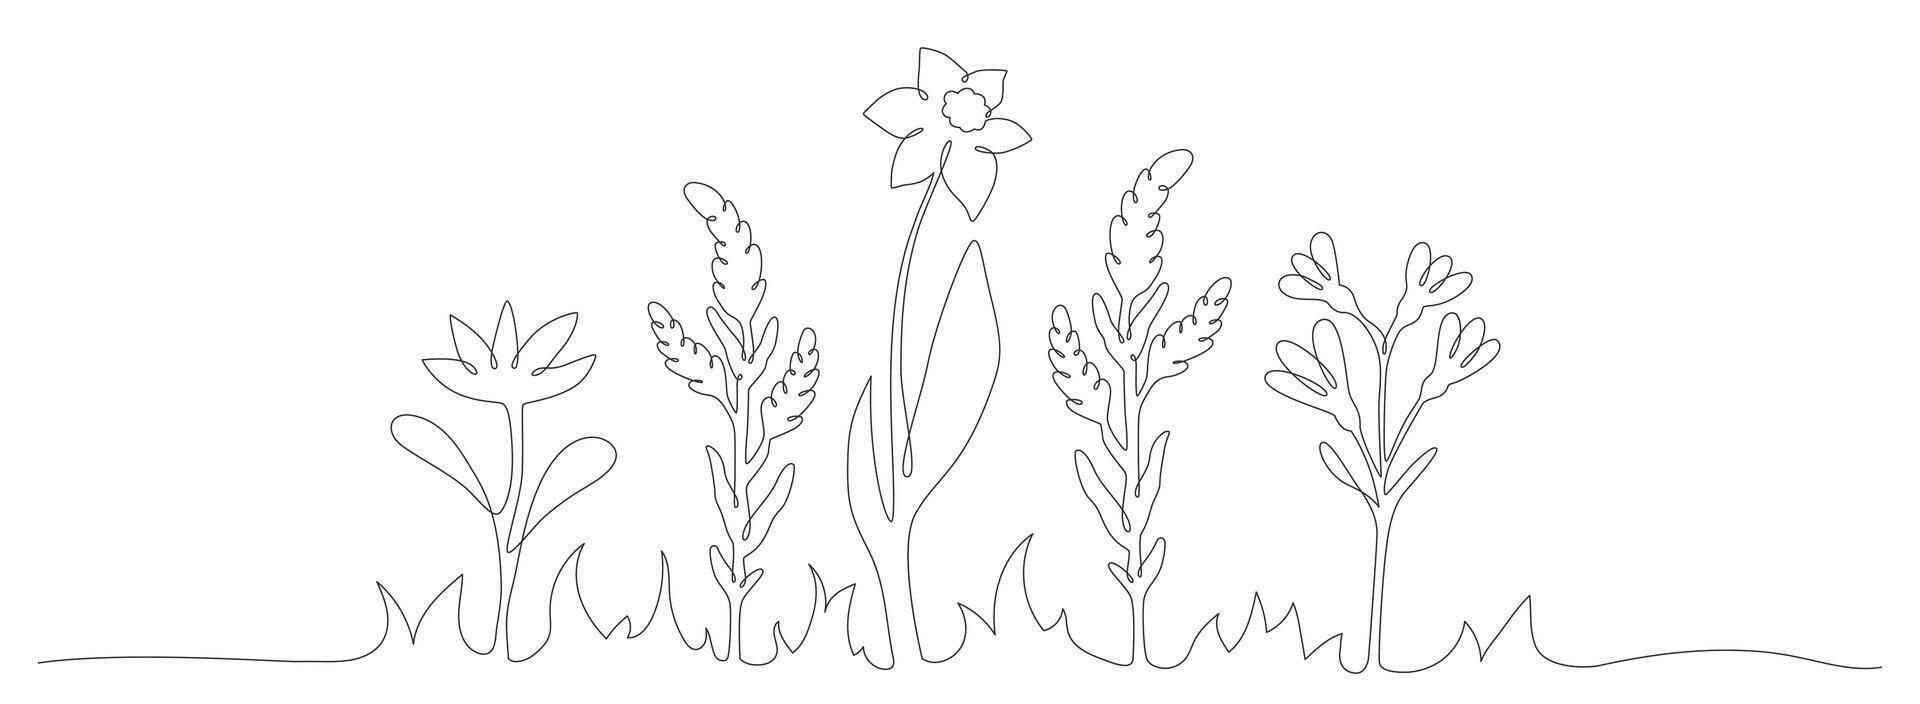 Wildflowers in continuous line art vector